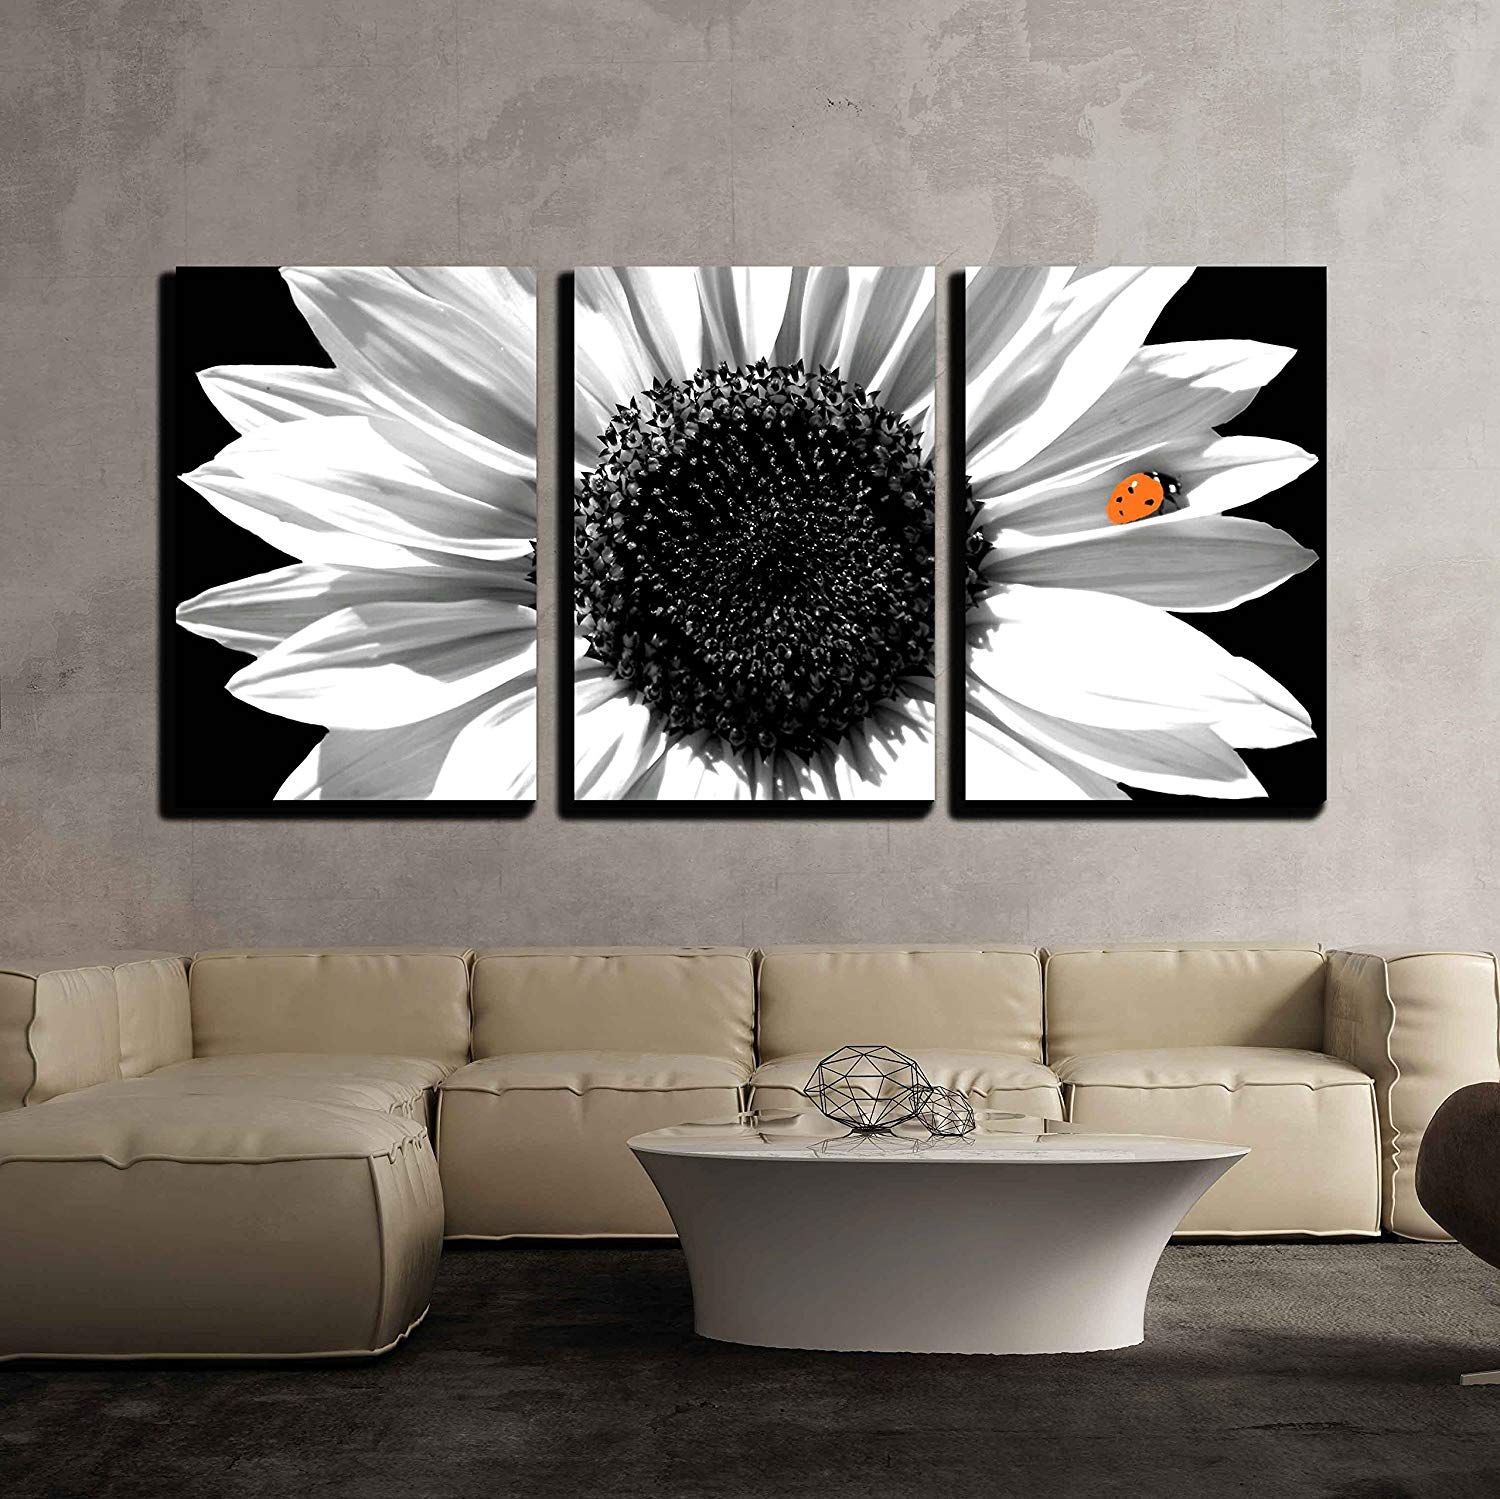 Wall26 – 3 Piece Canvas Wall Art – Sunflower In Black And White With With Regard To Recent Sunflower Metal Framed Wall Art (View 6 of 20)